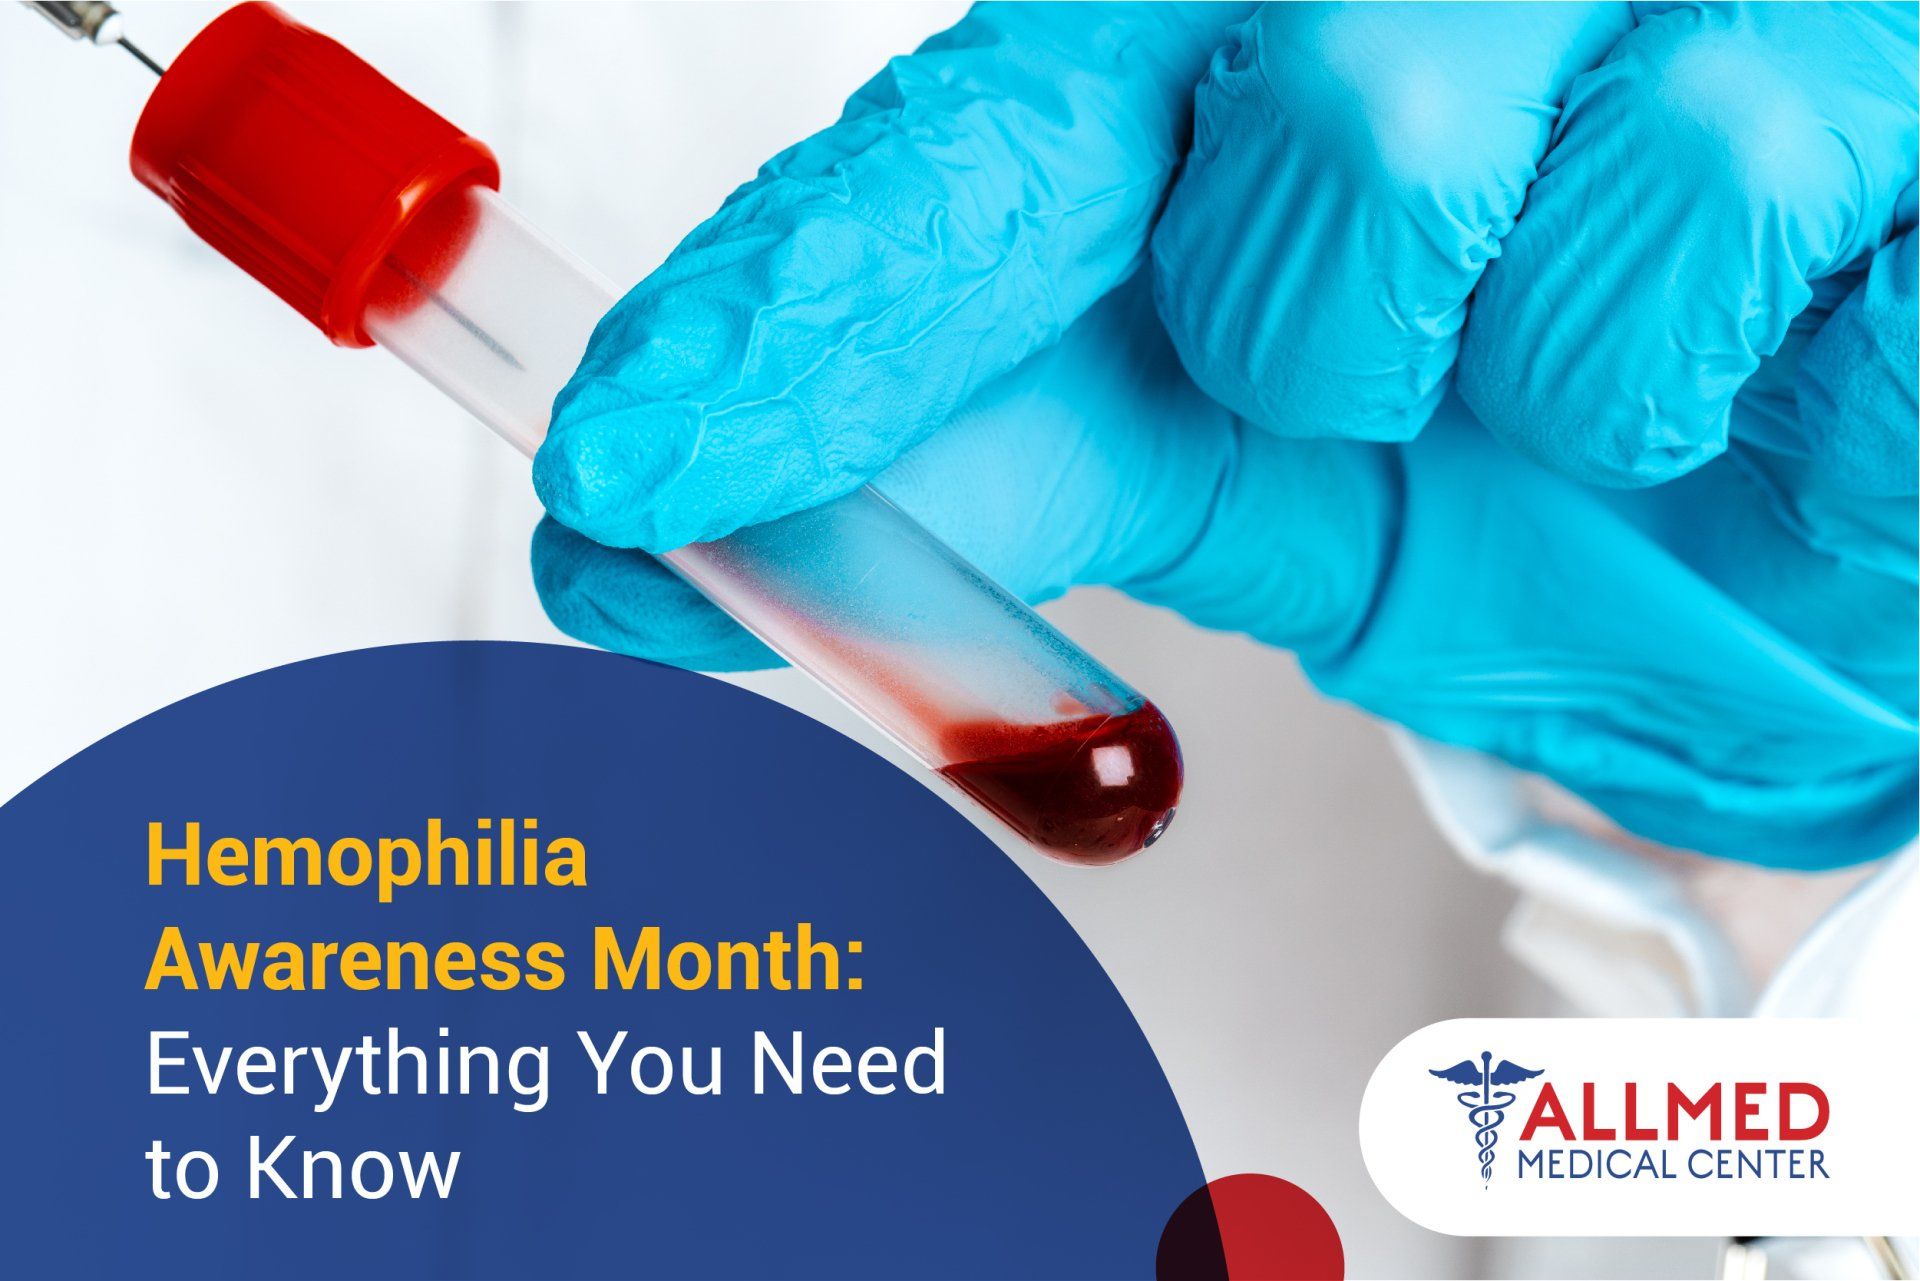 Hemophilia Awareness Month: Everything You Need to Know